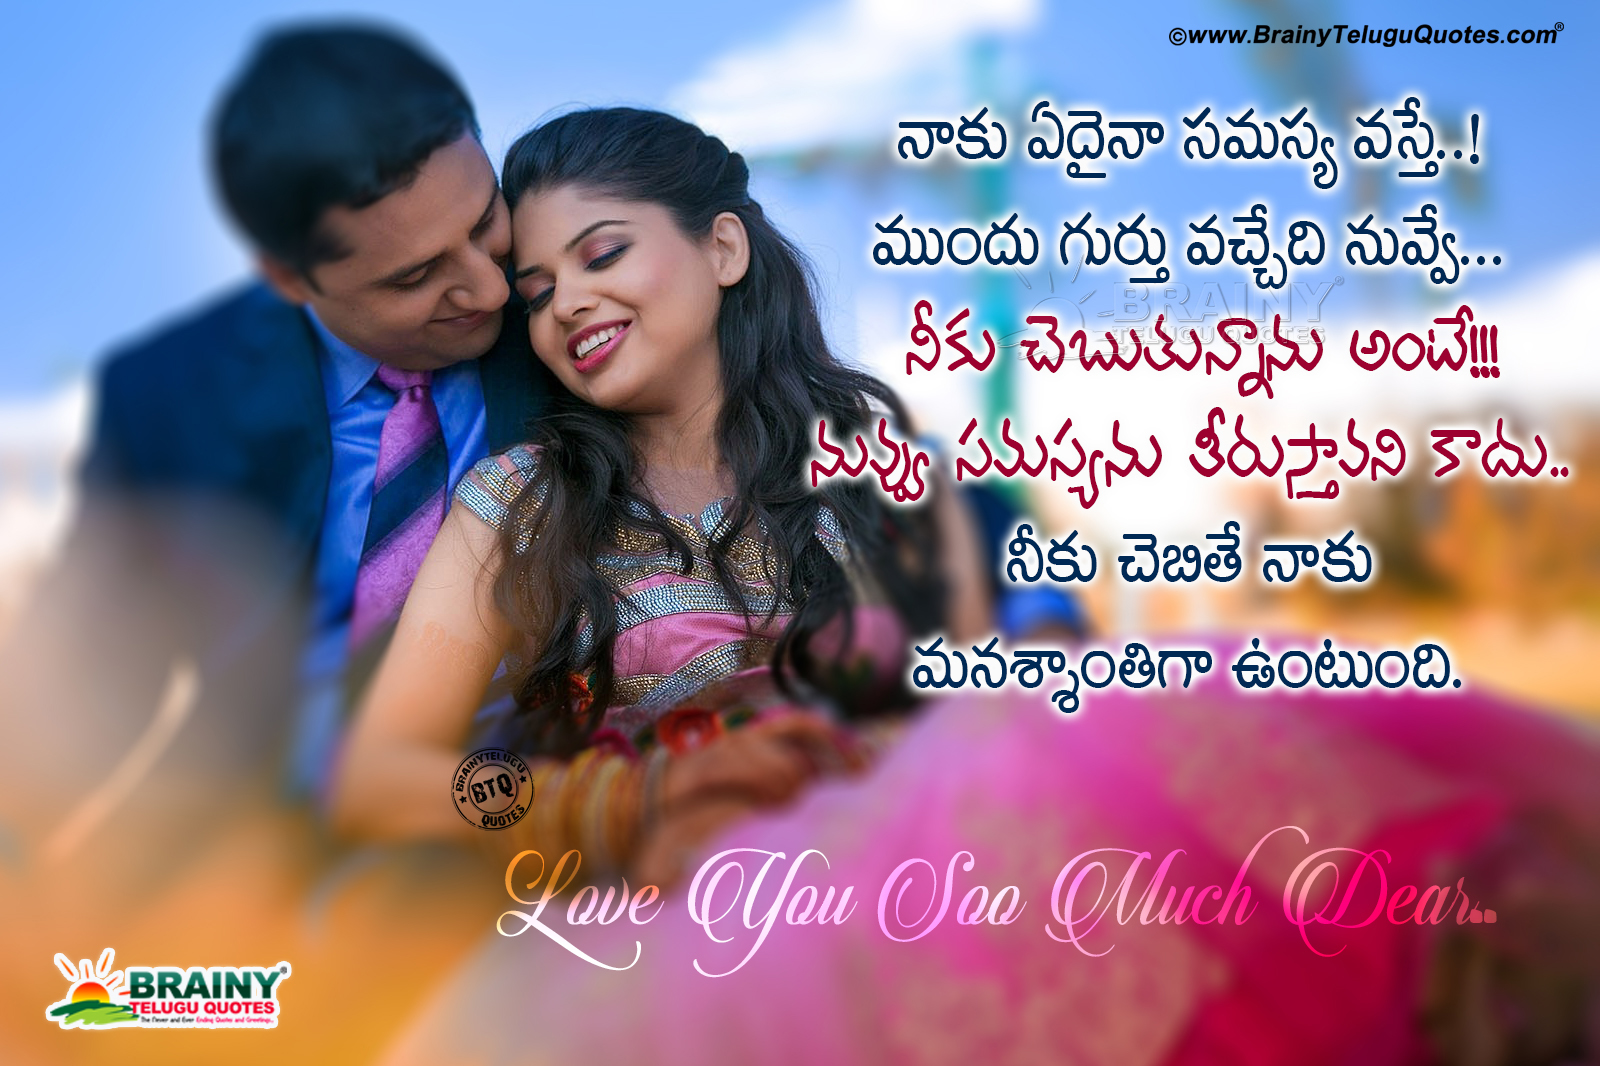 Telugu Nice Family Love Quotations,wife Love Quotes - Wife And Husband Quotes In Telugu - HD Wallpaper 